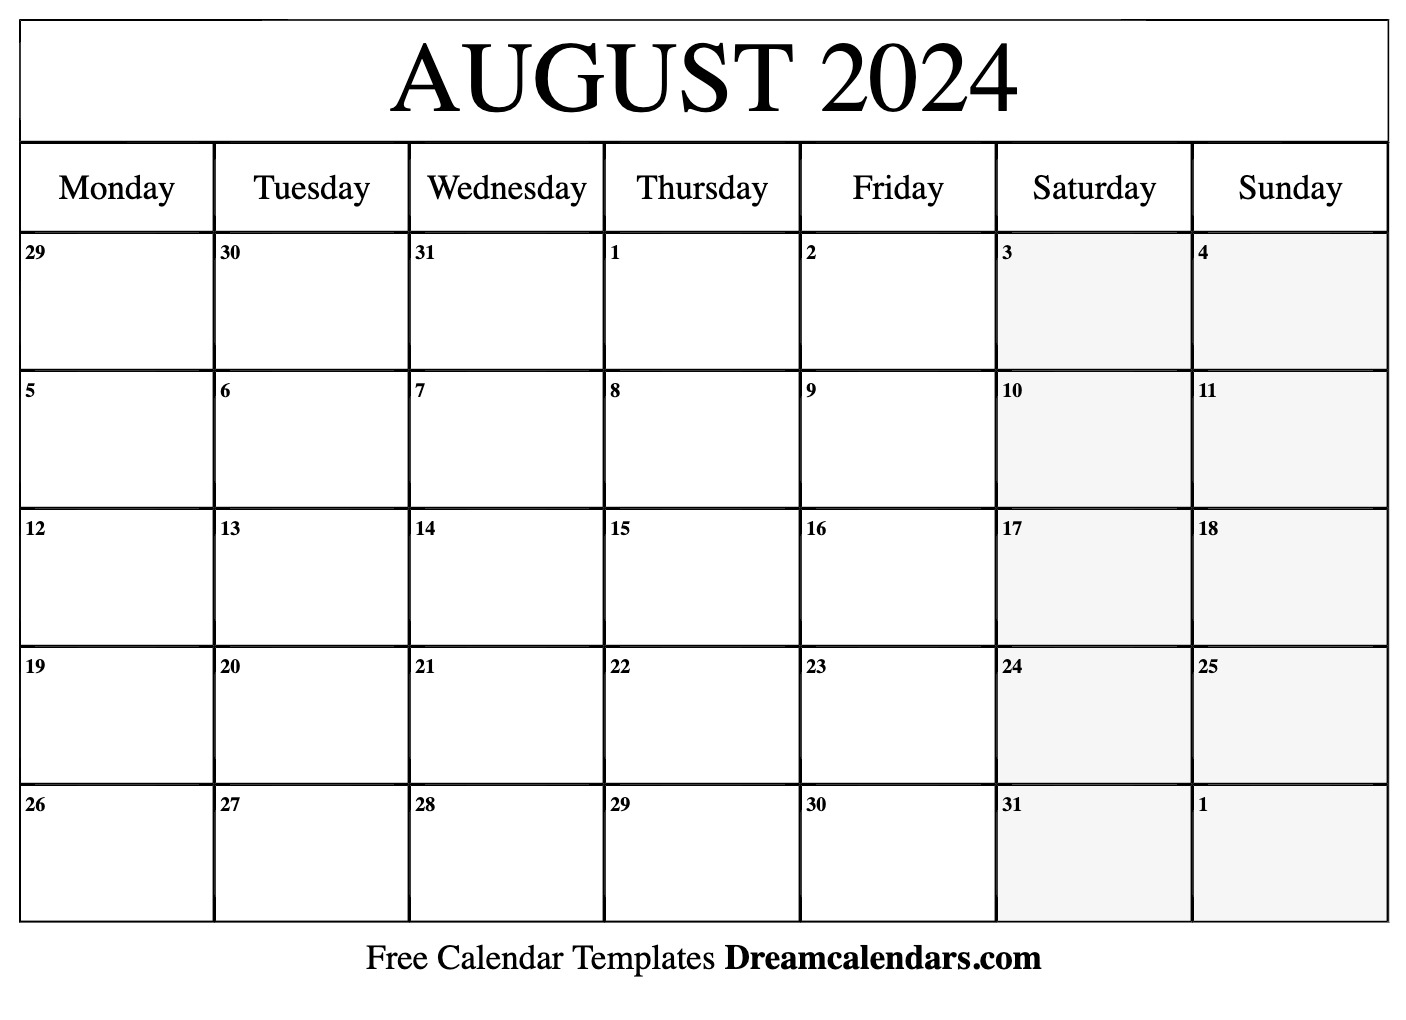 August 2024 Calendar | Free Blank Printable With Holidays for August 2024 Calendar Printable